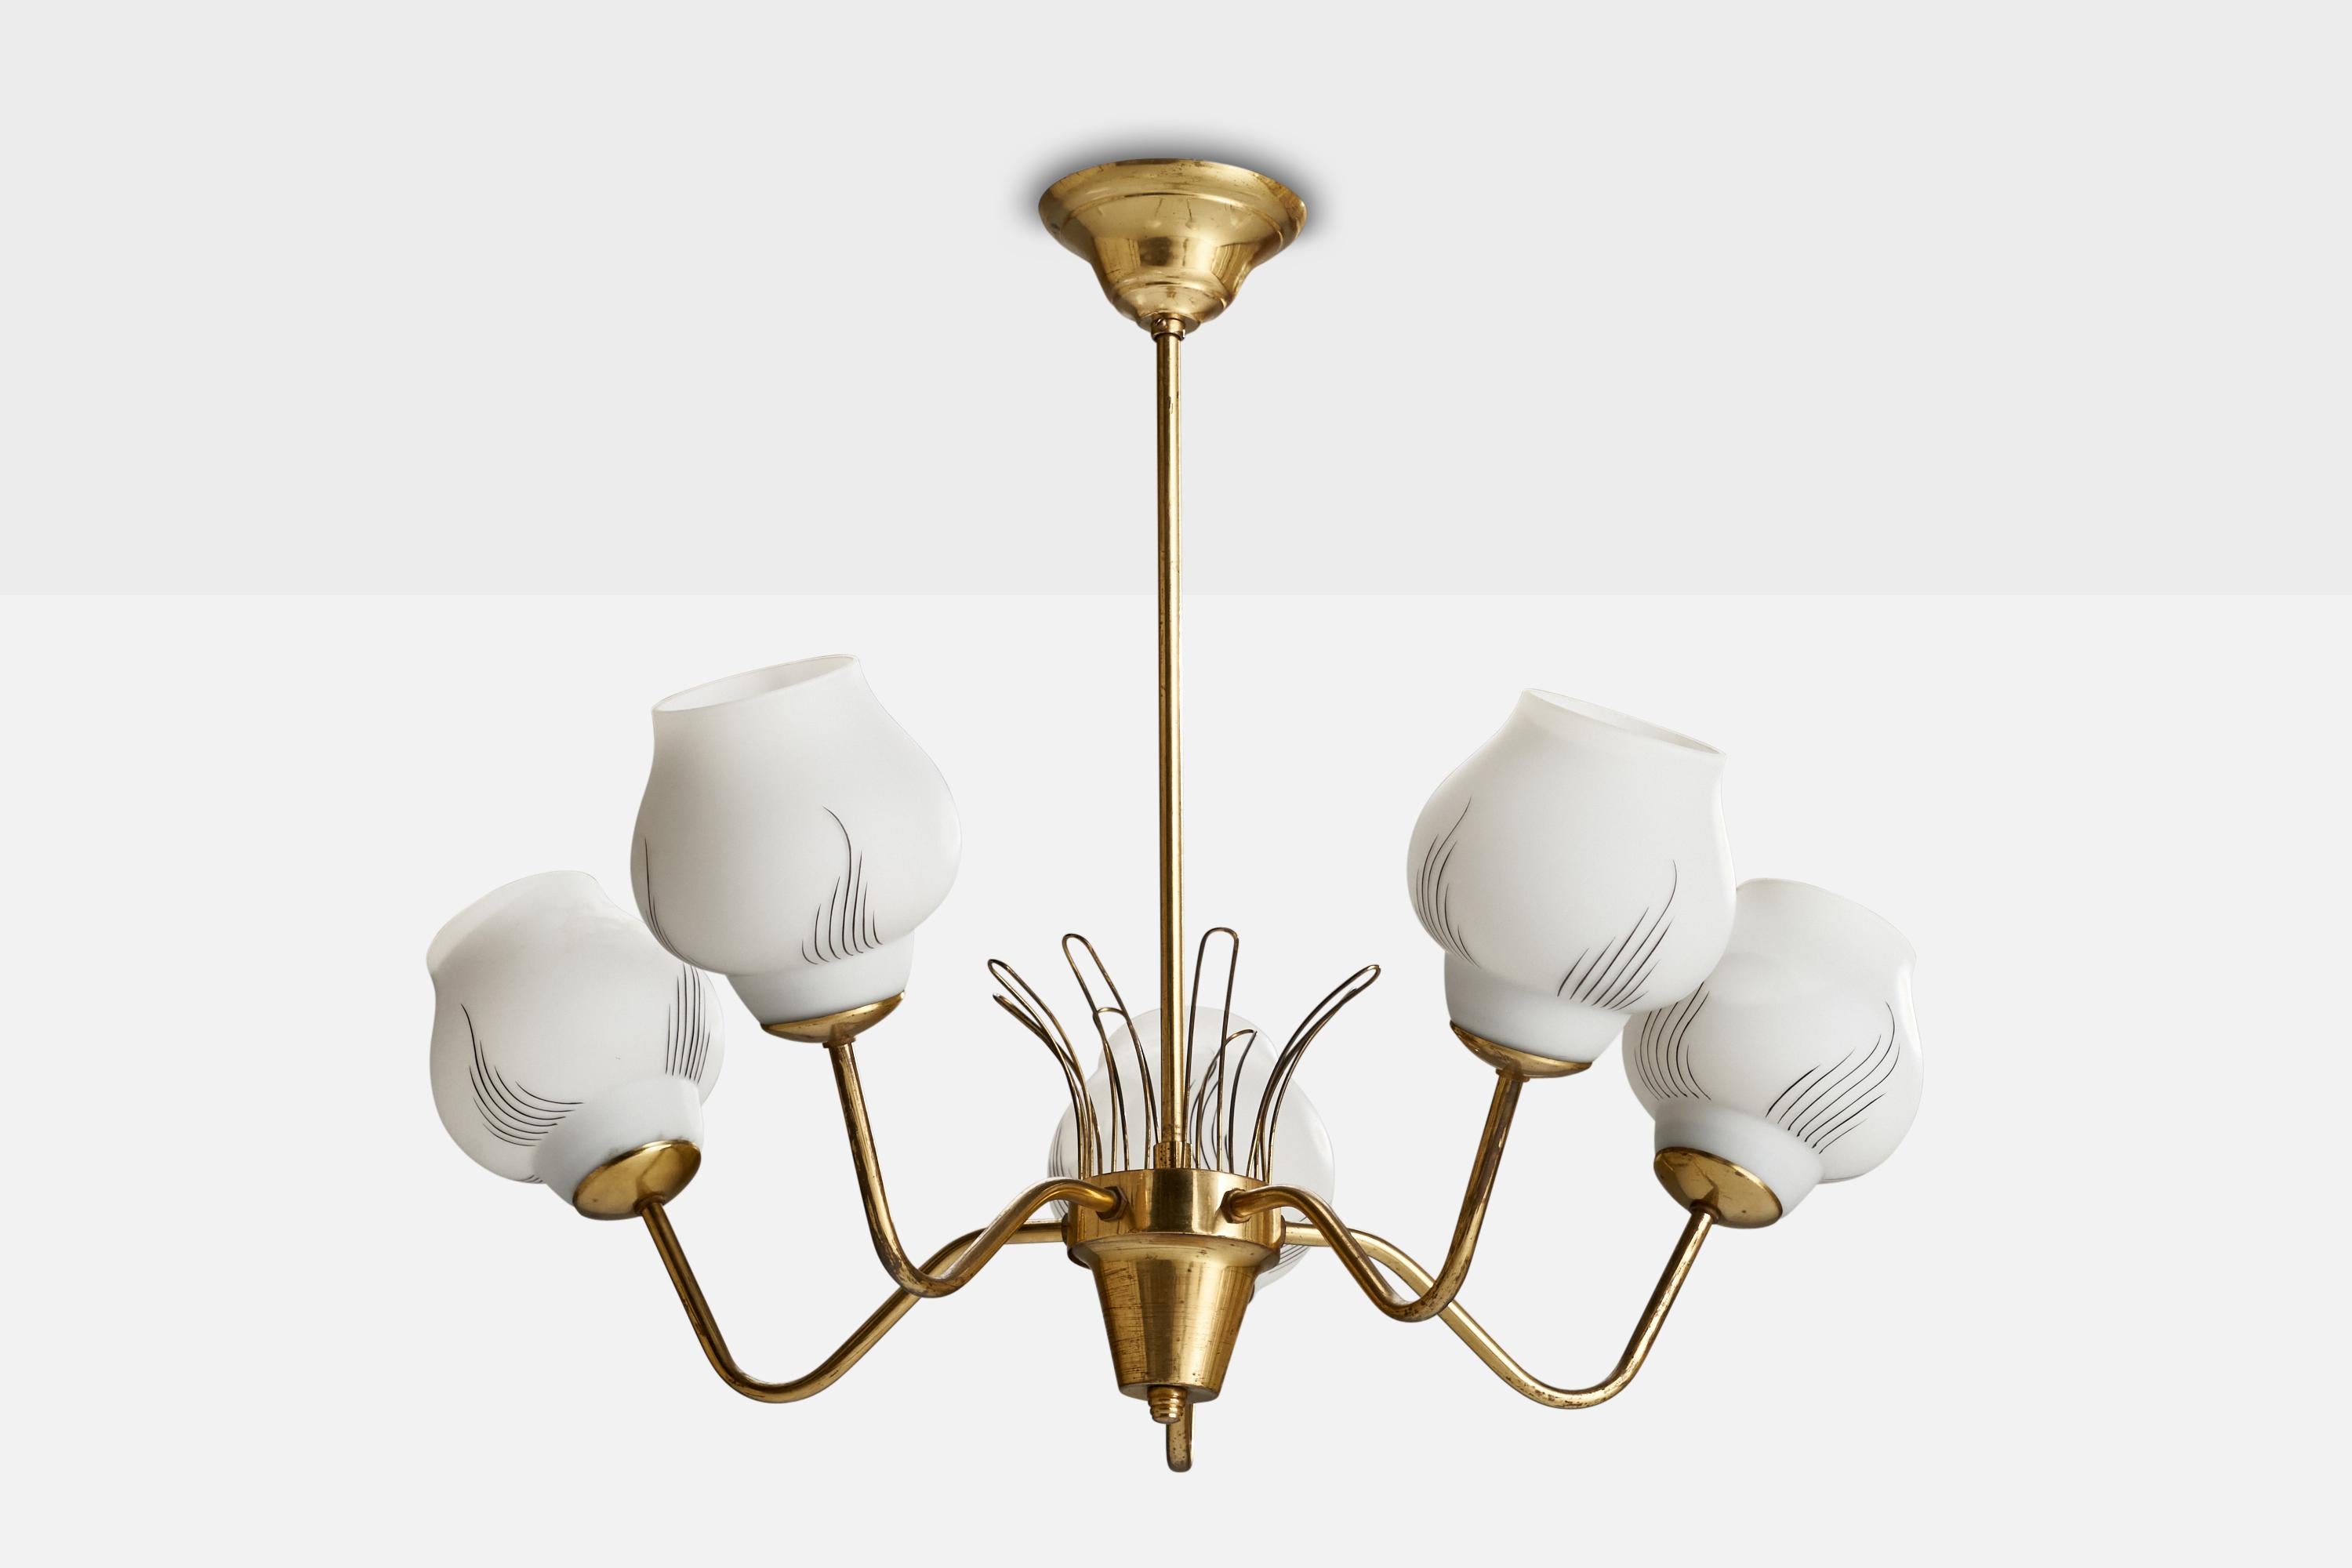 A brass and opaline chandelier designed and produced in Sweden, c. 1950s.

Dimensions of canopy (inches): 1.75” H x 4.25” Diameter
Socket takes standard E-26 bulbs. 5 socket.There is no maximum wattage stated on the fixture. All lighting will be